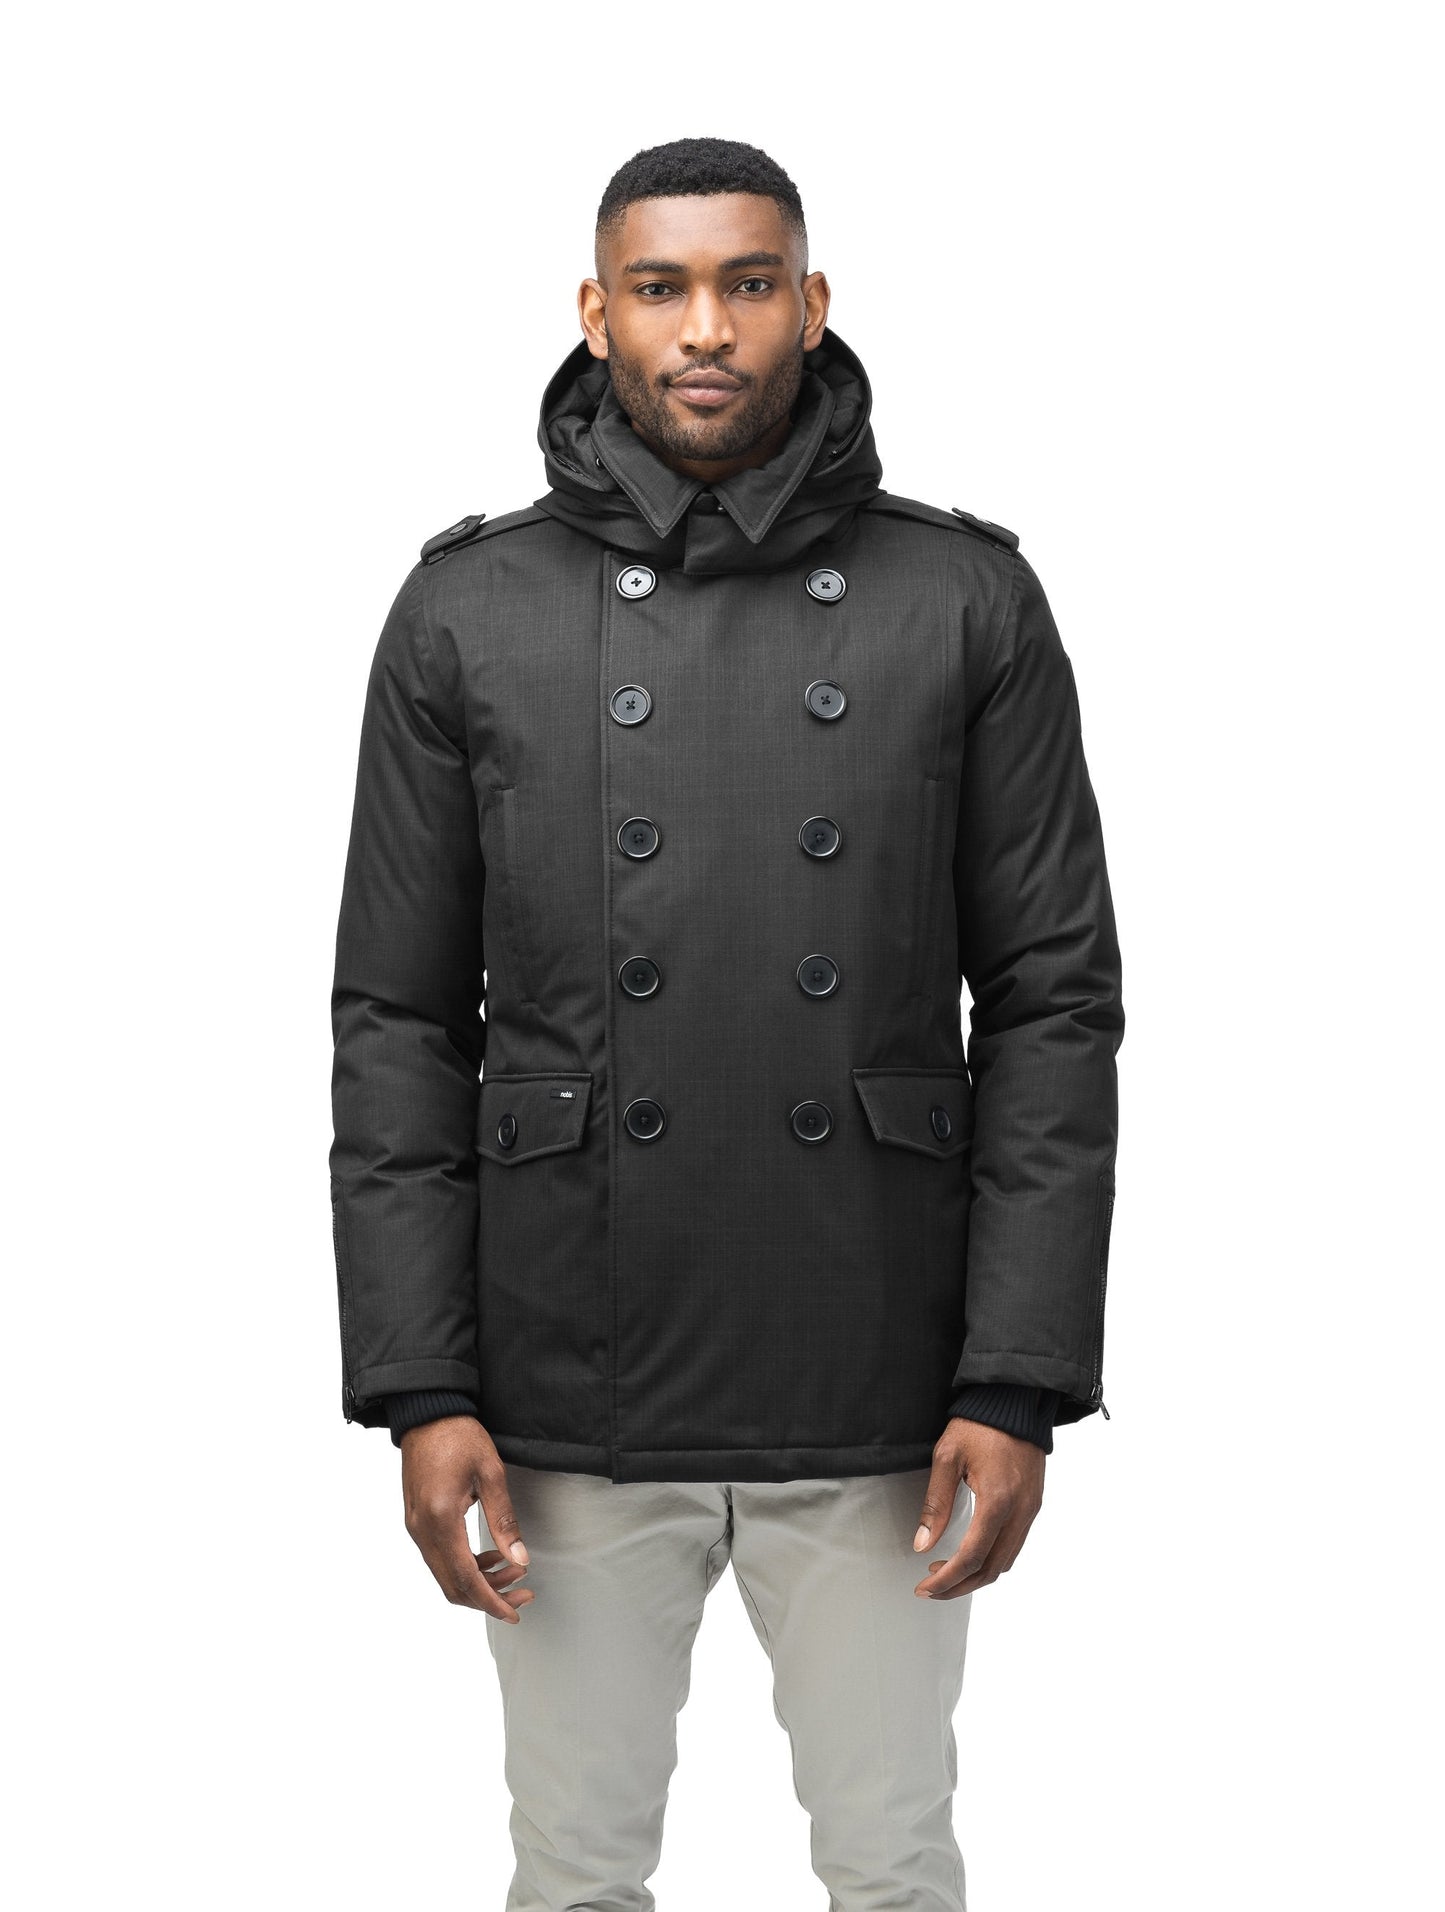 Men's double breasted down filled parka in CH Black